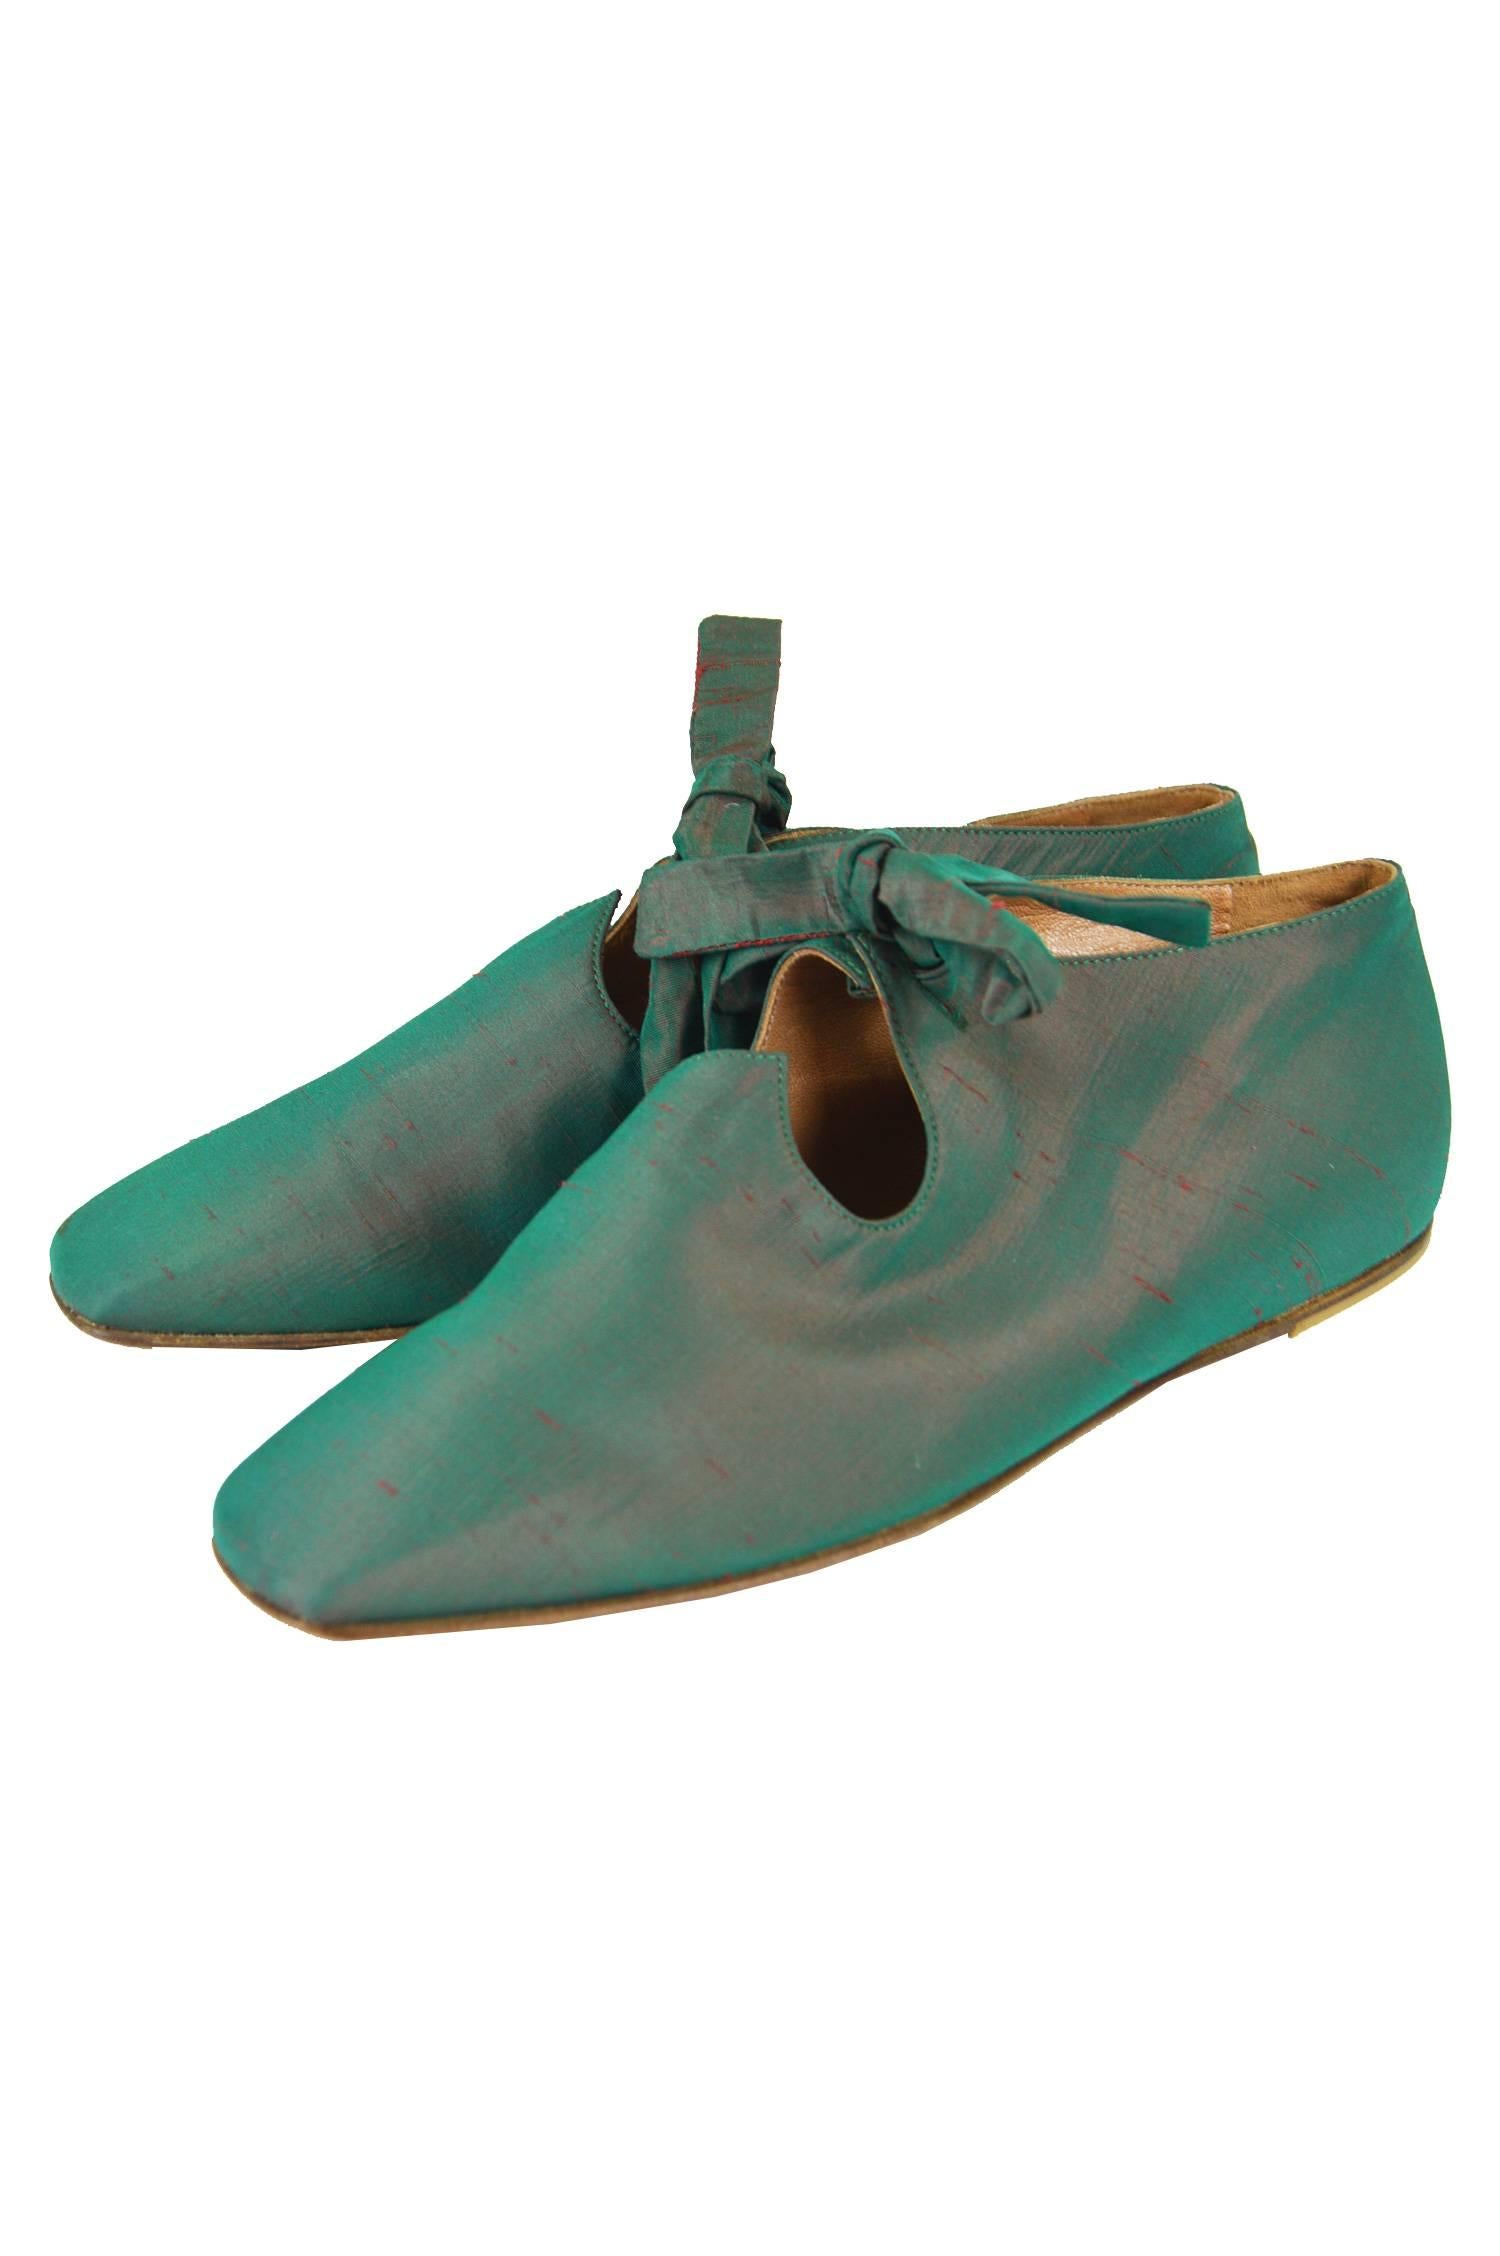 Romeo Gigli Vintage Iridescent Shot Silk Taffeta Green Flats, 1980s

Size: Marked 36.5 which is roughly a UK 3.5 / US 4 but please check measurements as shoe sizing can be awkward and differ from brand to brand. 
Length of insole - 23.5cm /